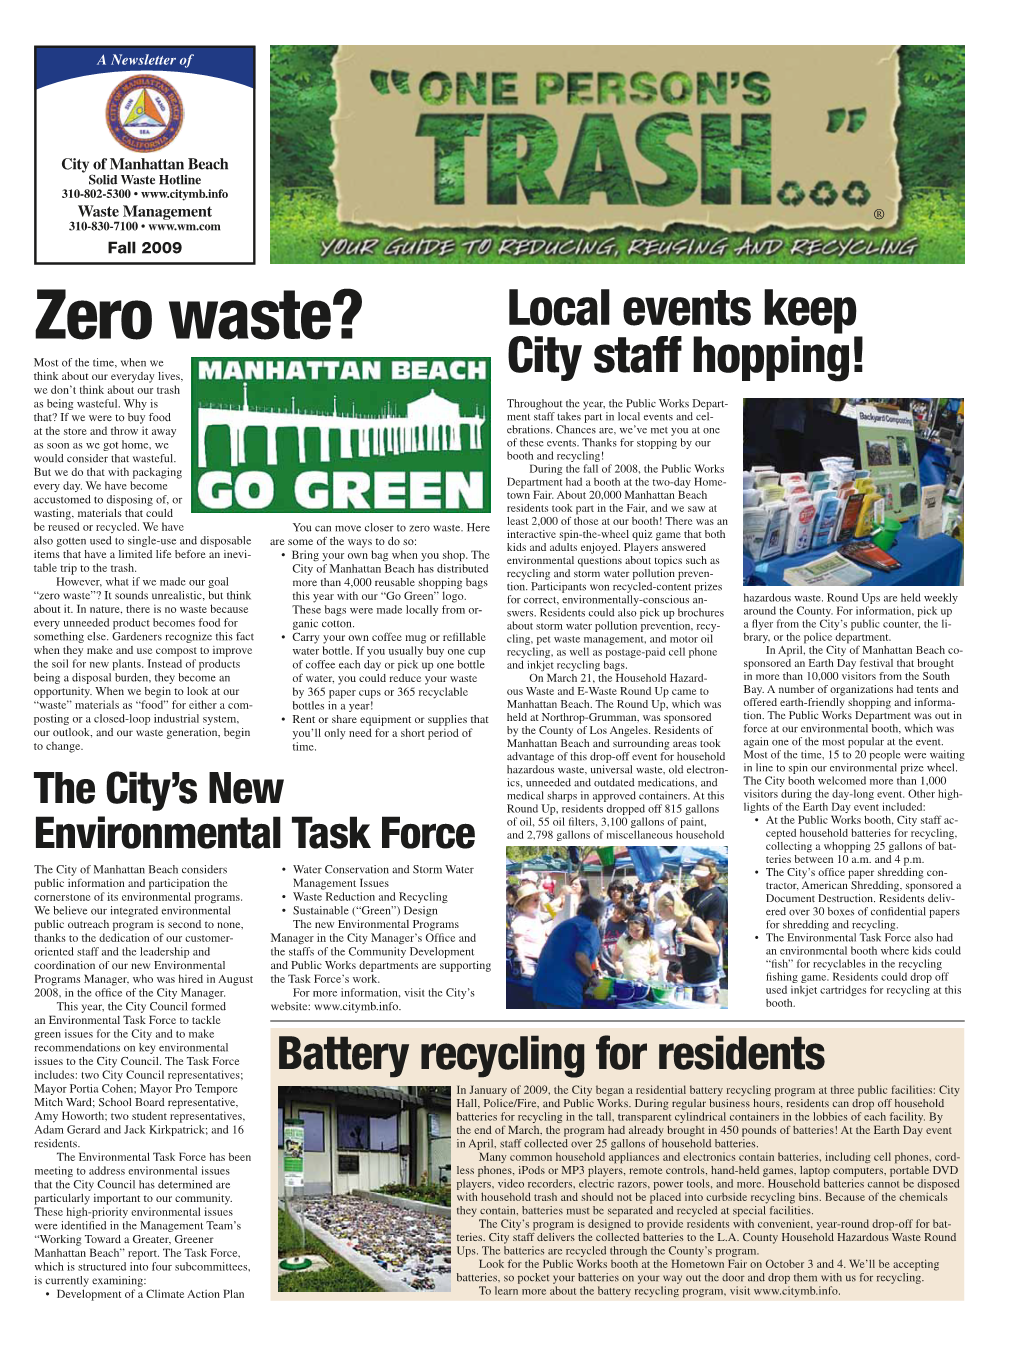 Zero Waste? Local Events Keep Most of the Time, When We Think About Our Everyday Lives, City Staff Hopping! We Don’T Think About Our Trash As Being Wasteful